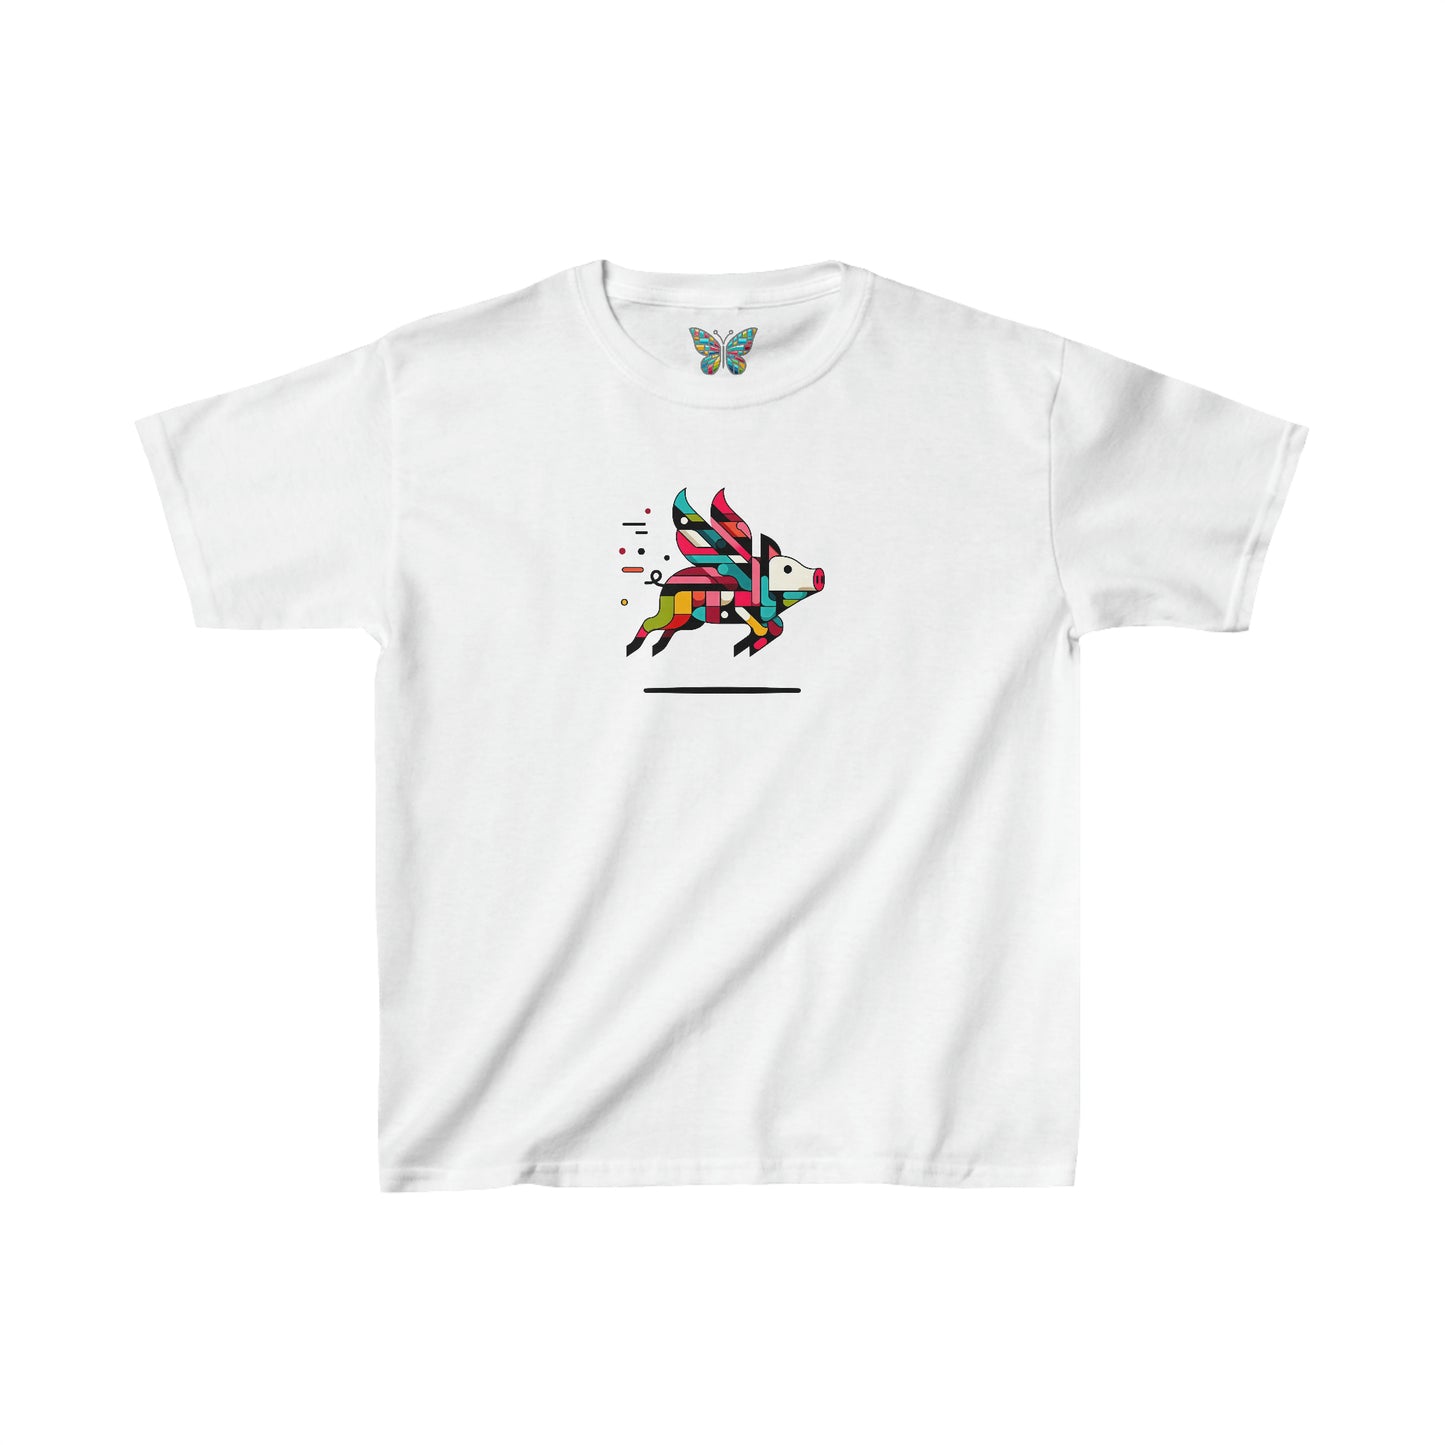 Flying Pig Quirkella - Youth - Snazzle Tee